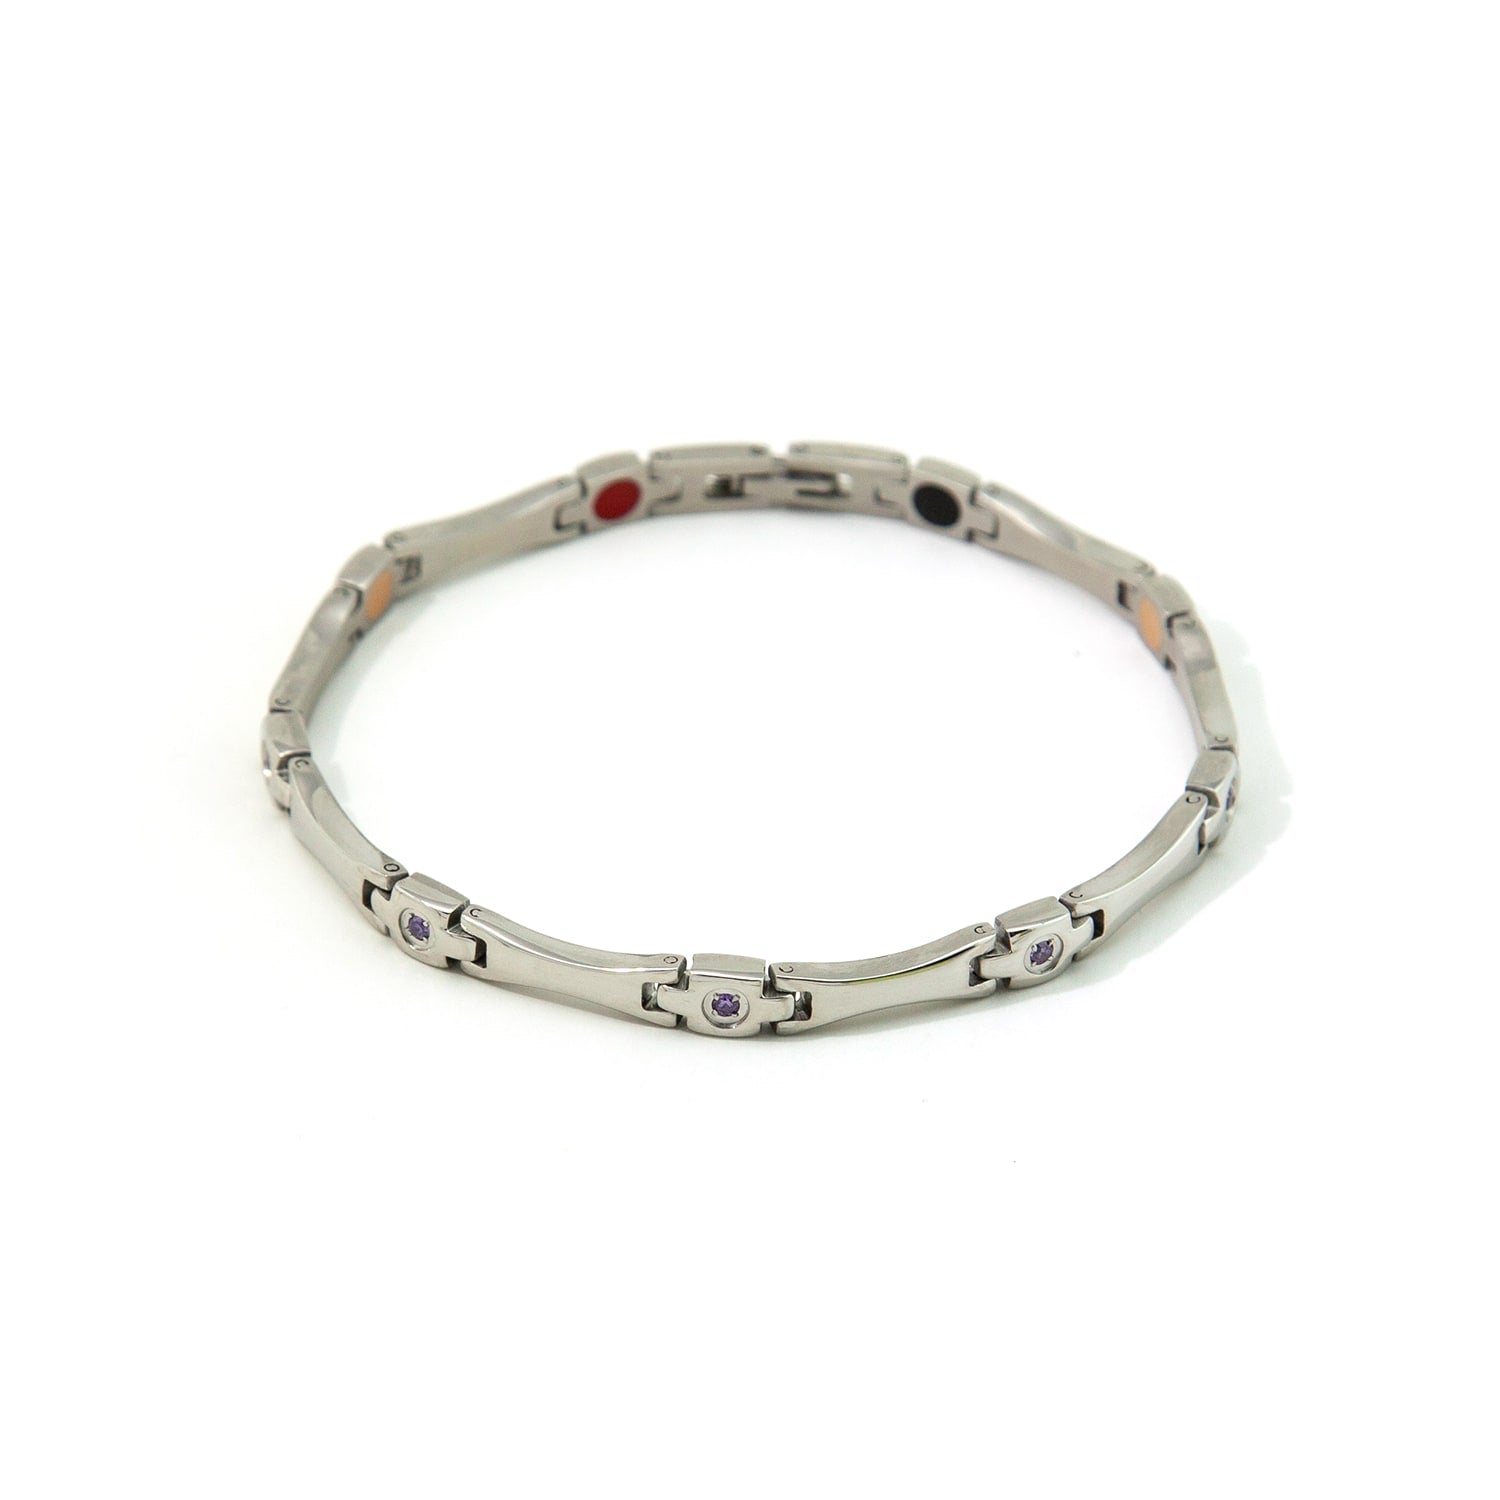 Finesse - Negative Ion Bracelet - Stainless Steel with Purple Crystals.